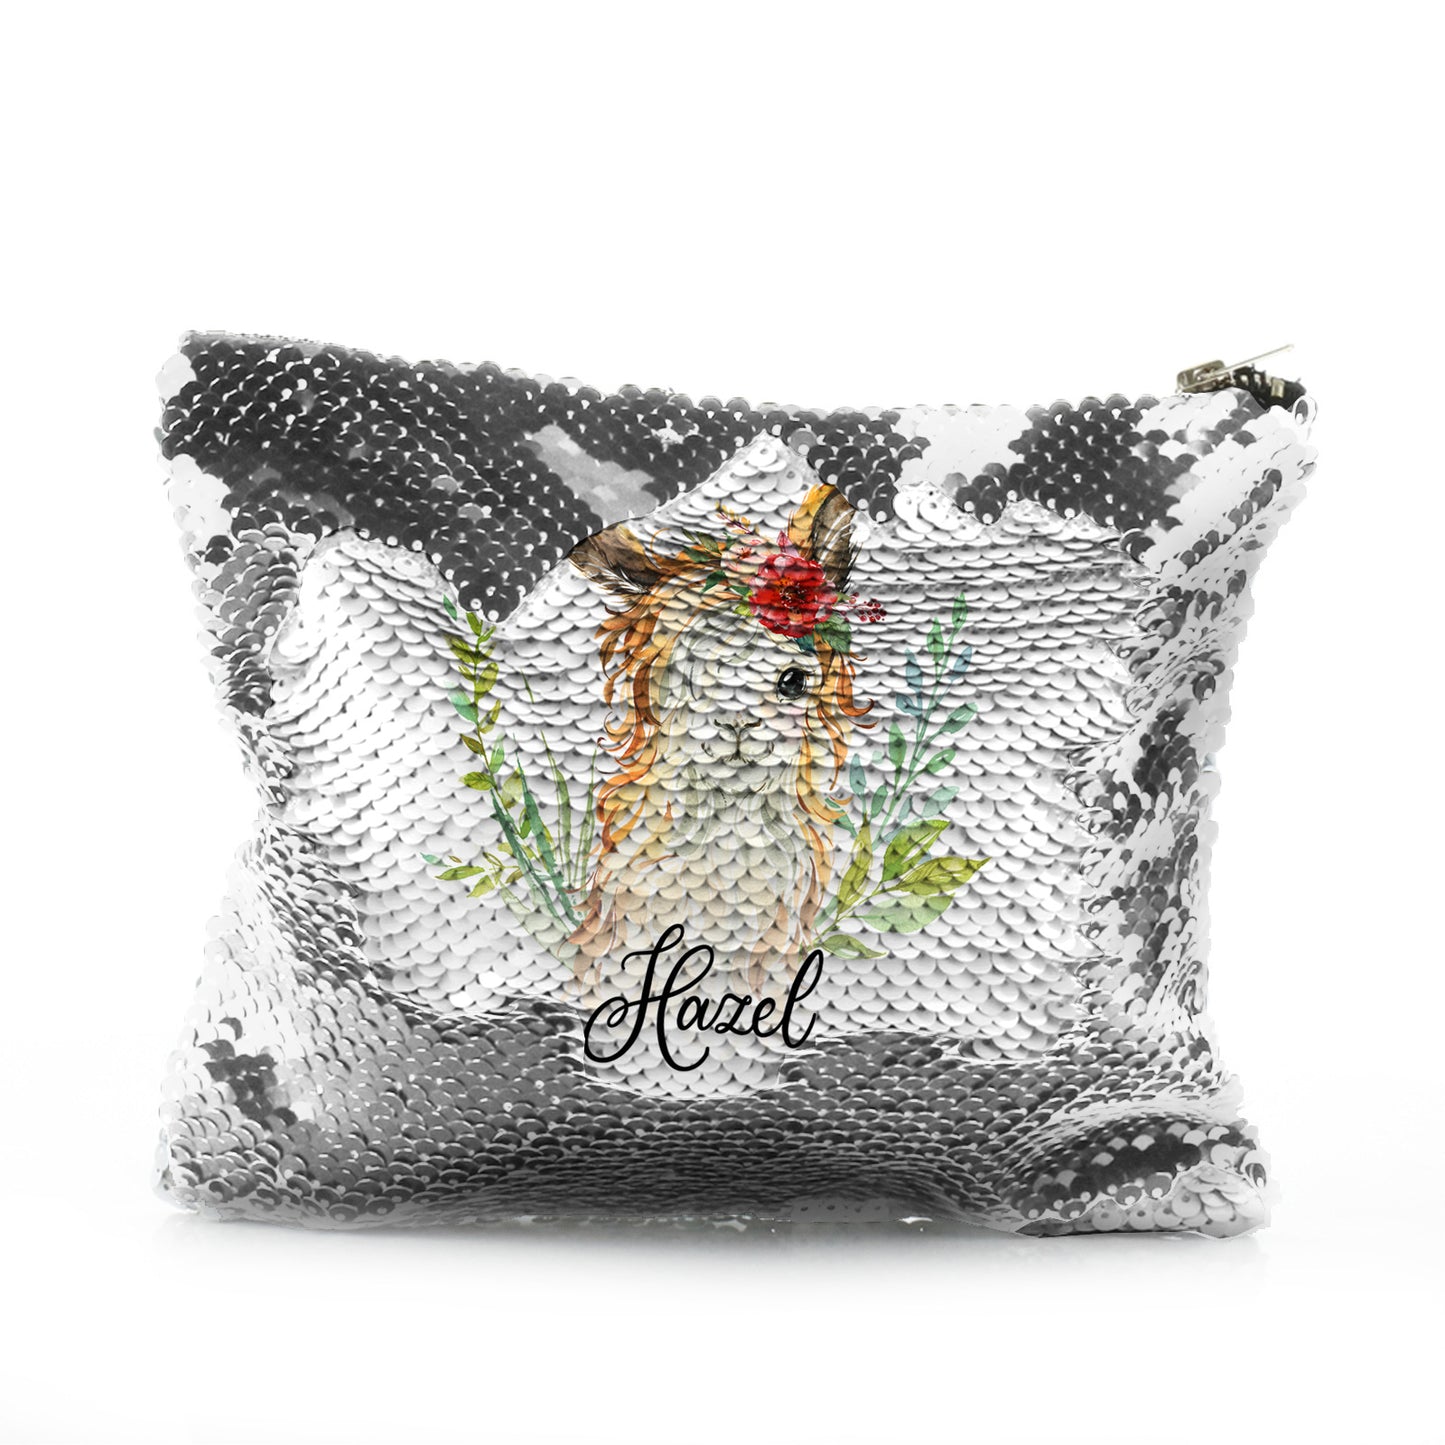 Personalised Sequin Zip Bag with White Goat with Red Flower Hair and Cute Text